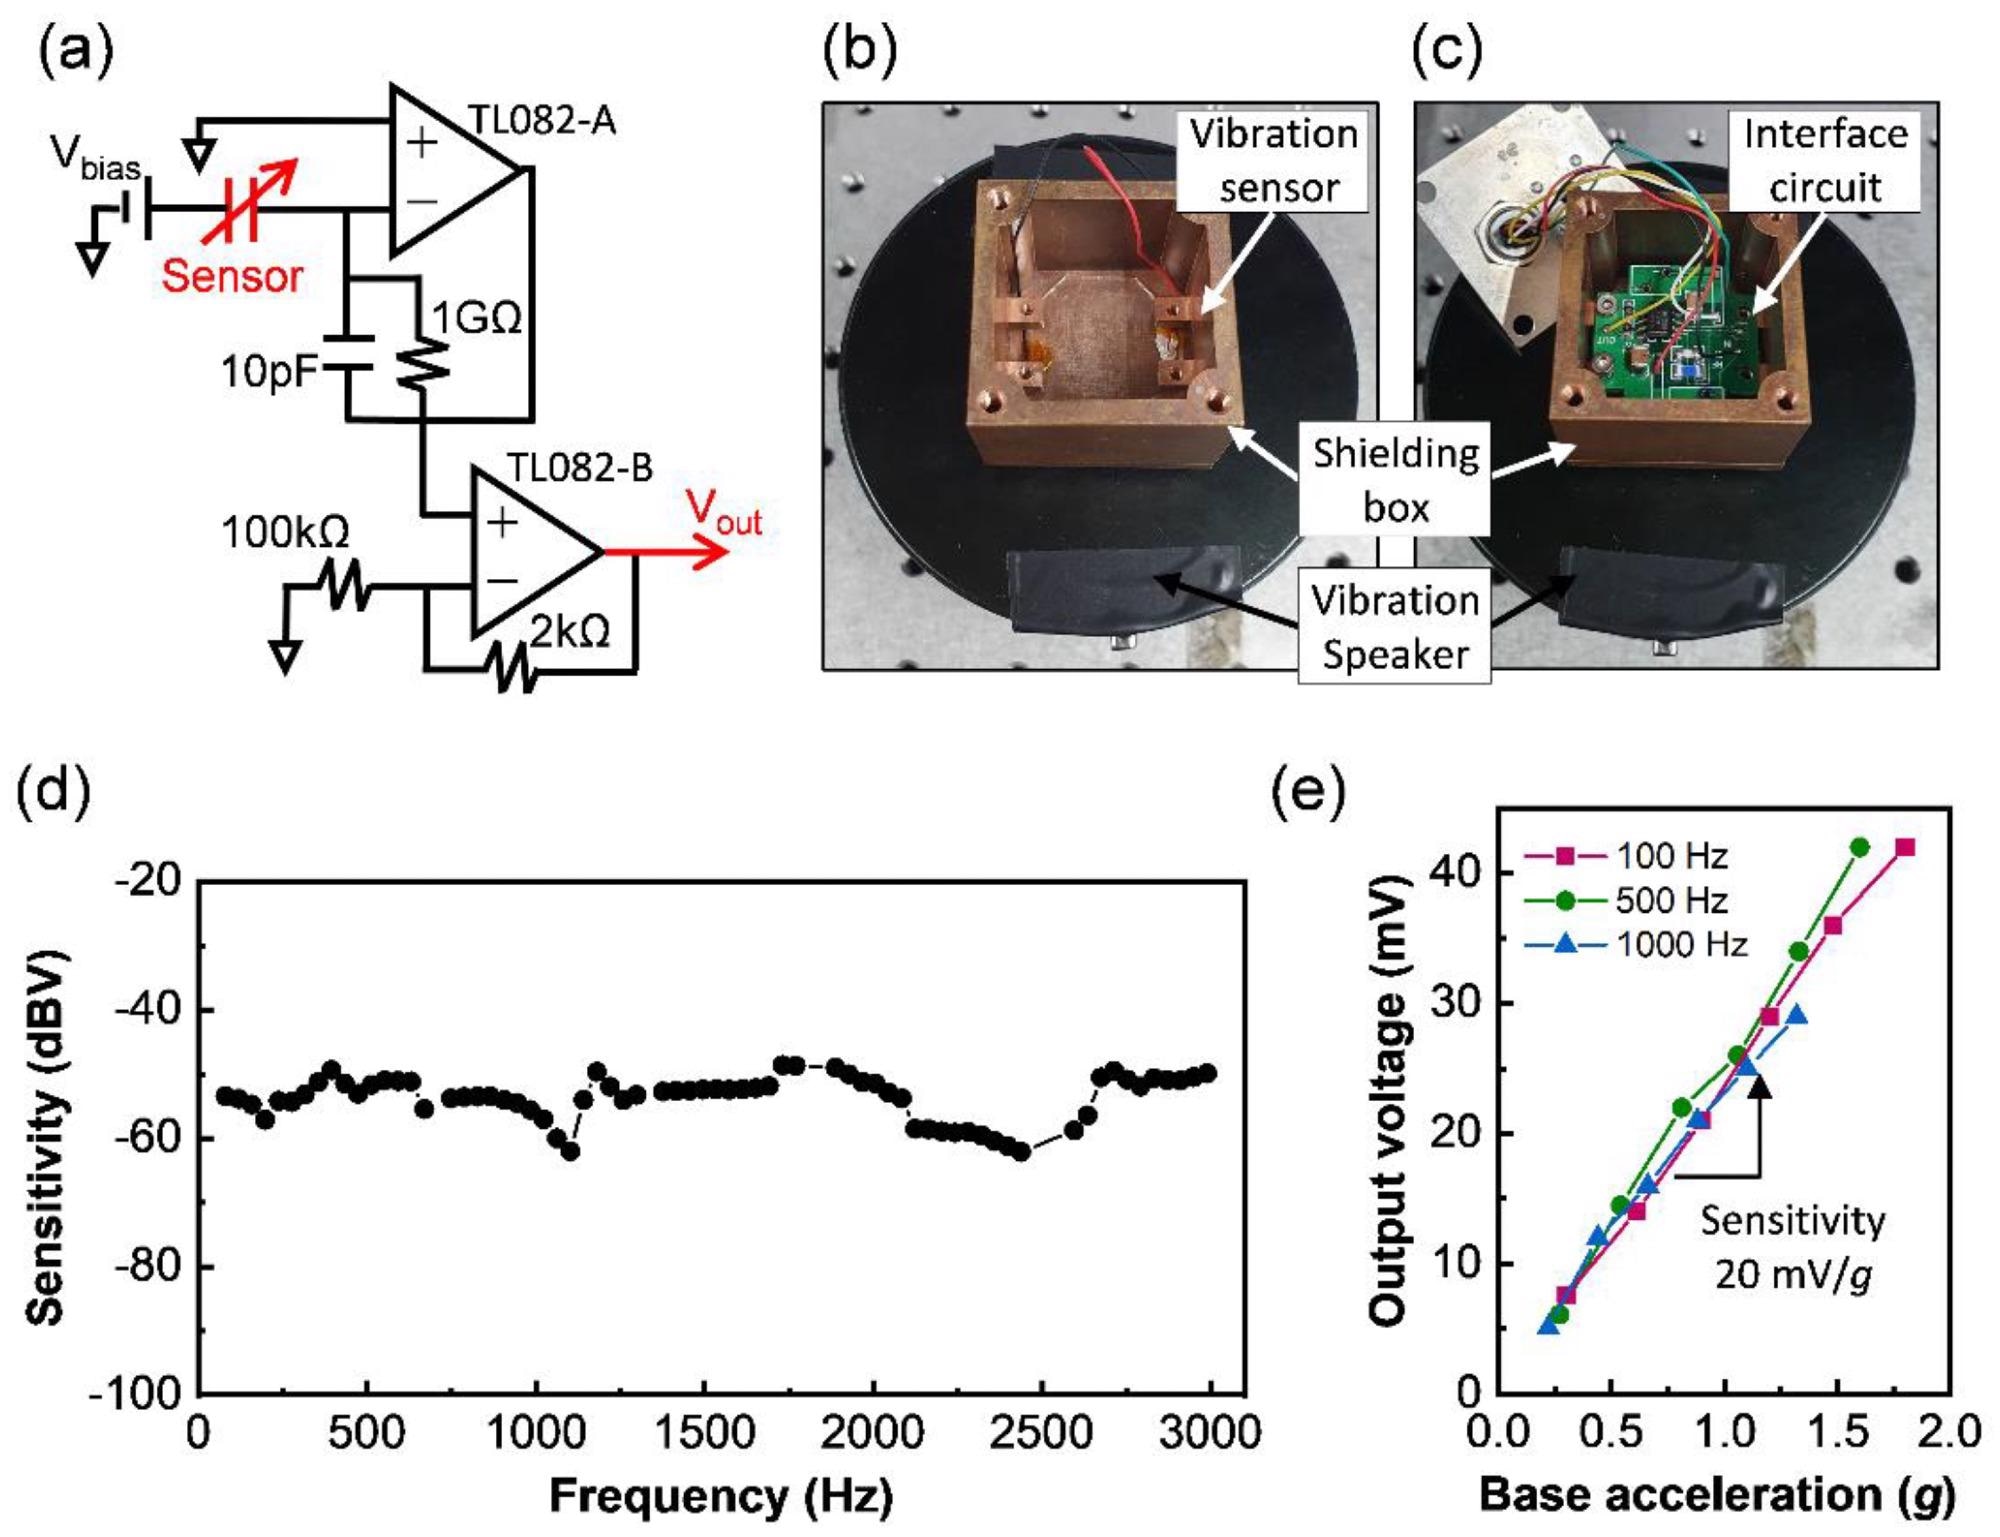 Experimental setup and measurement results for the vibrational response of the sensor. (a) Interface circuit diagram connected to the sensor. Photographic images of (b) the device and (c) the electric circuit located in a shielding box made of metals on the vibration speaker. (d) Frequency response and (e) linearity of sensitivity of the fabricated sensor depending on input frequencies.